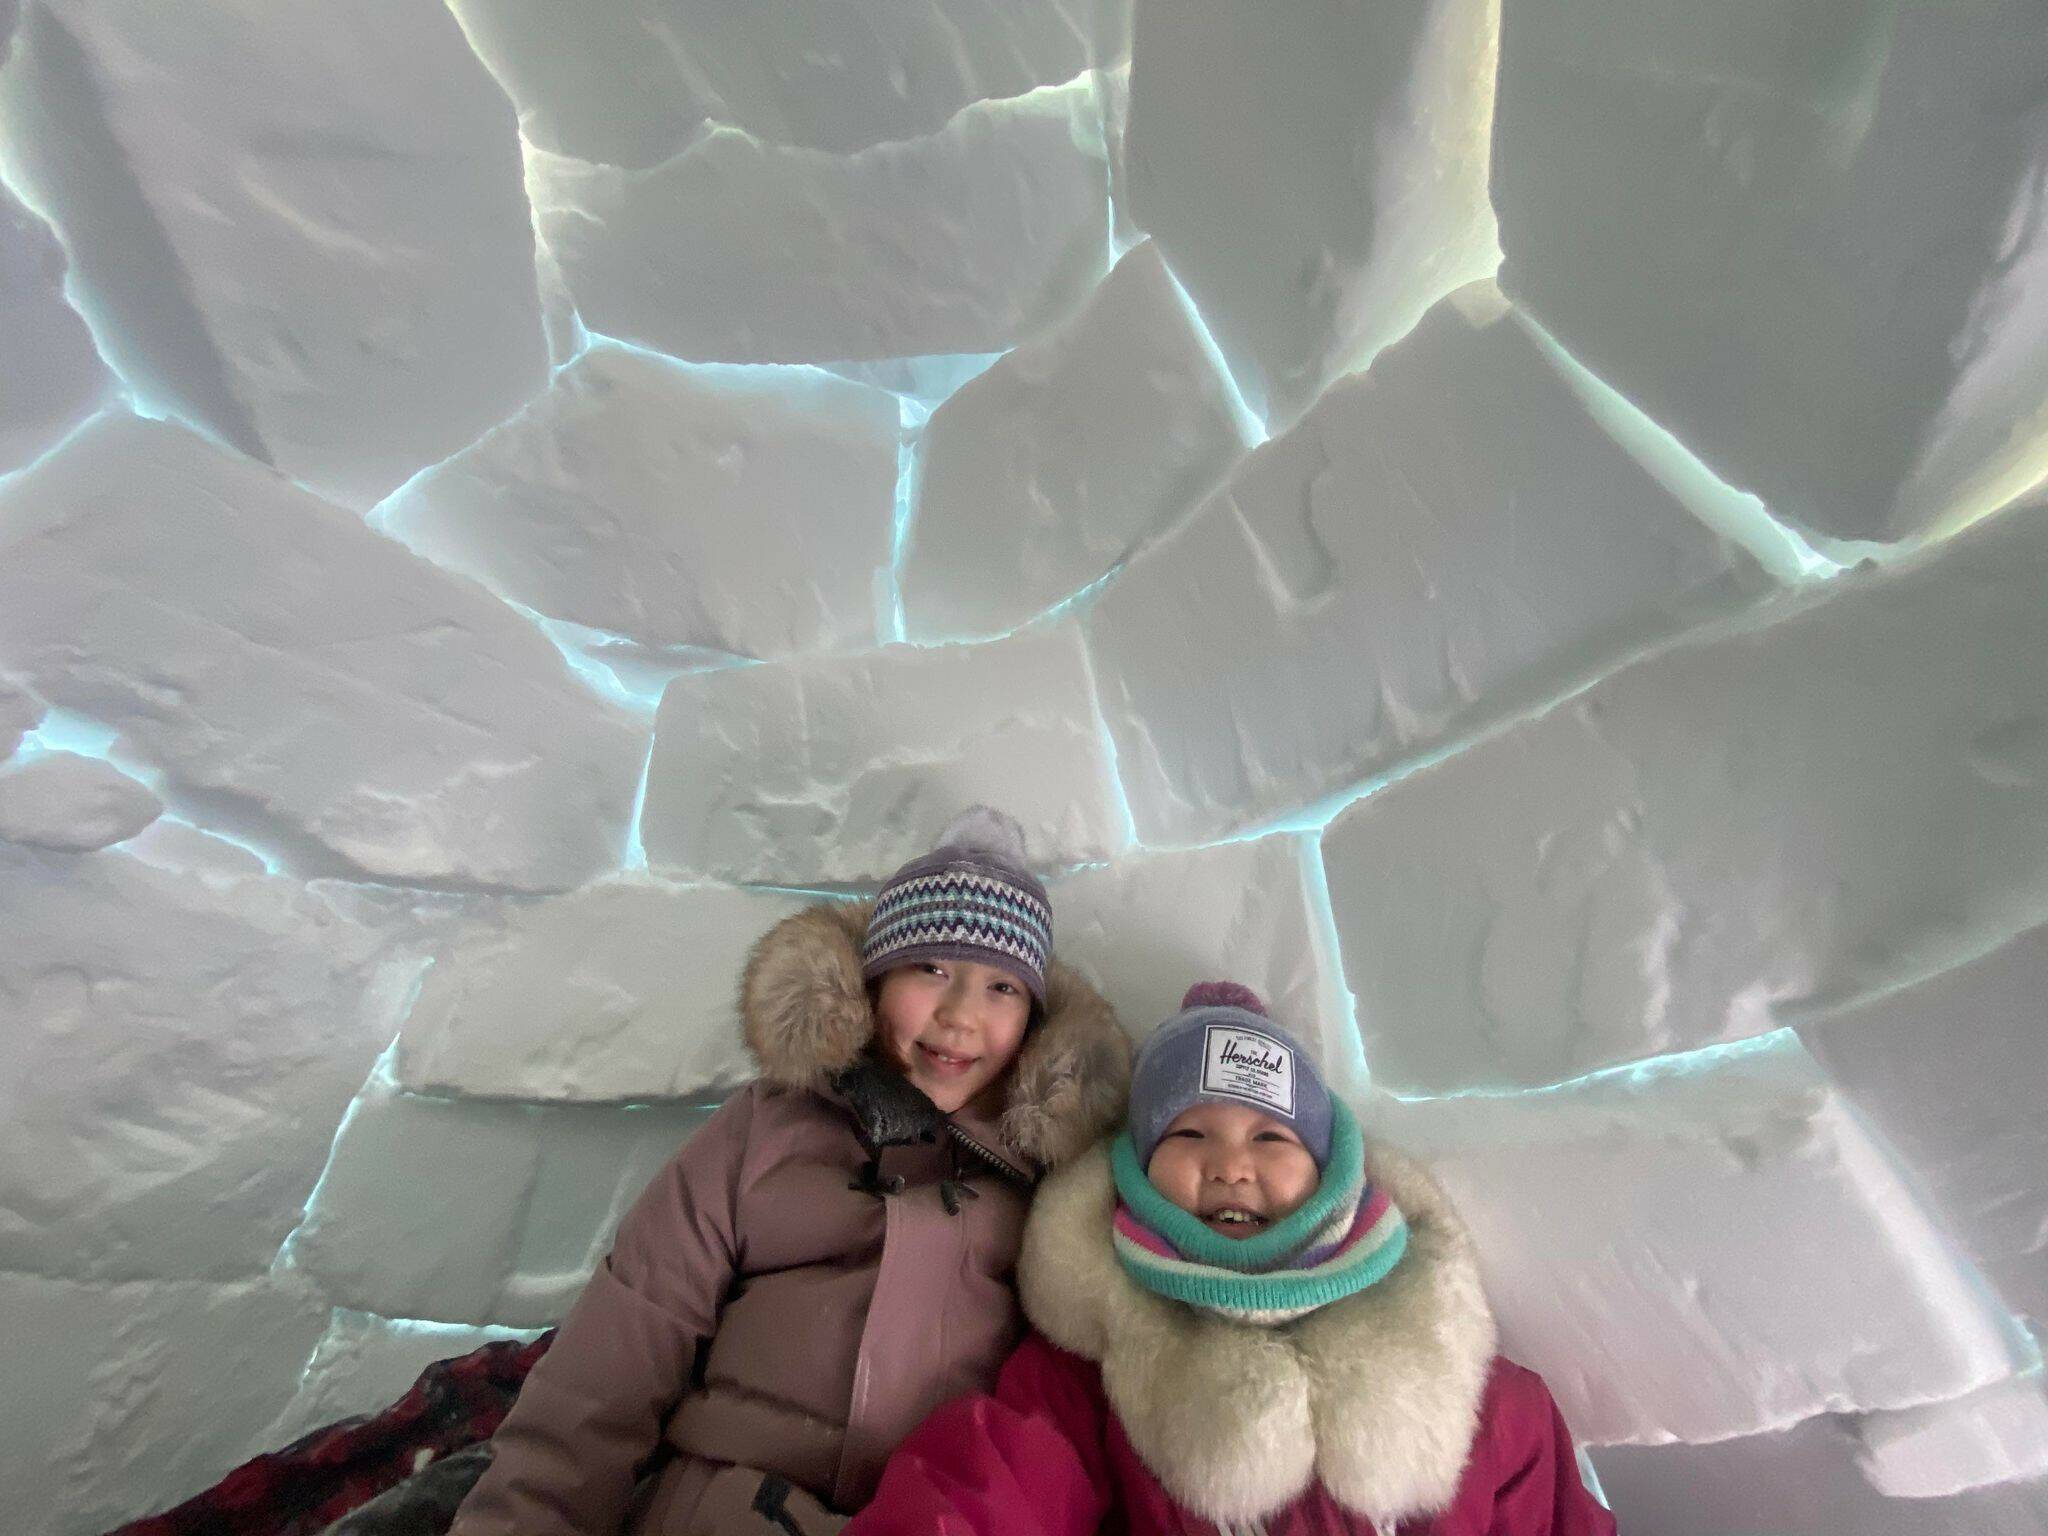 Come on in! Heres 12-year-old Kendra Tulugak OGorman Nakashook and little sister 4-year-old Olivia Neolik OGorman Nakashook happily sitting in their iglu. Built by their house on airport road in Cambridge Bay. Photo courtesy of Shelly OGorman